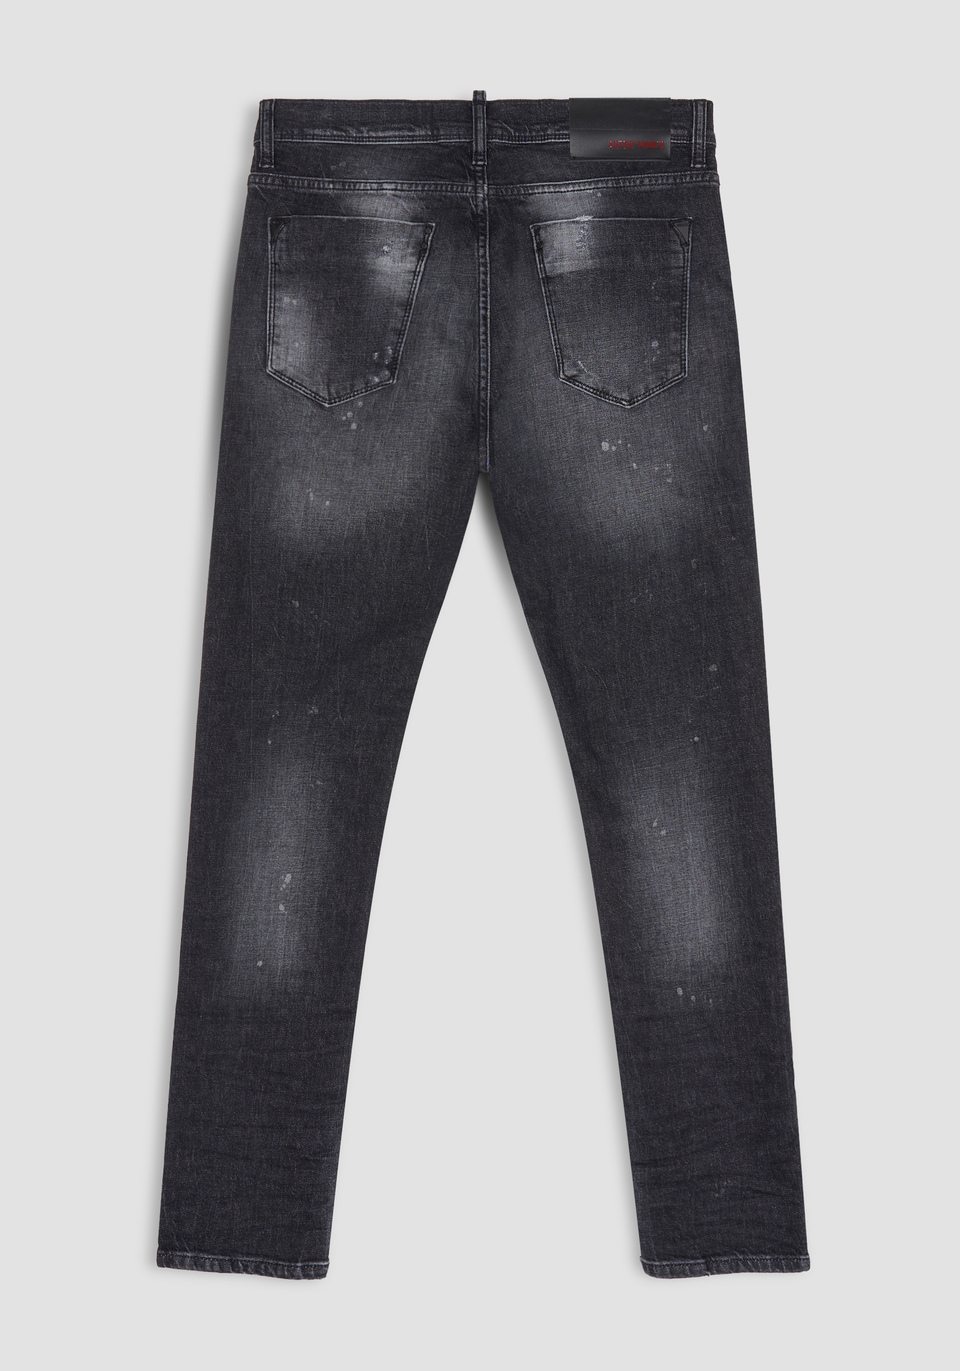 JEANS CARROT FIT “KENNY” IN MATERIALE RICICLATO - Antony Morato Online Shop